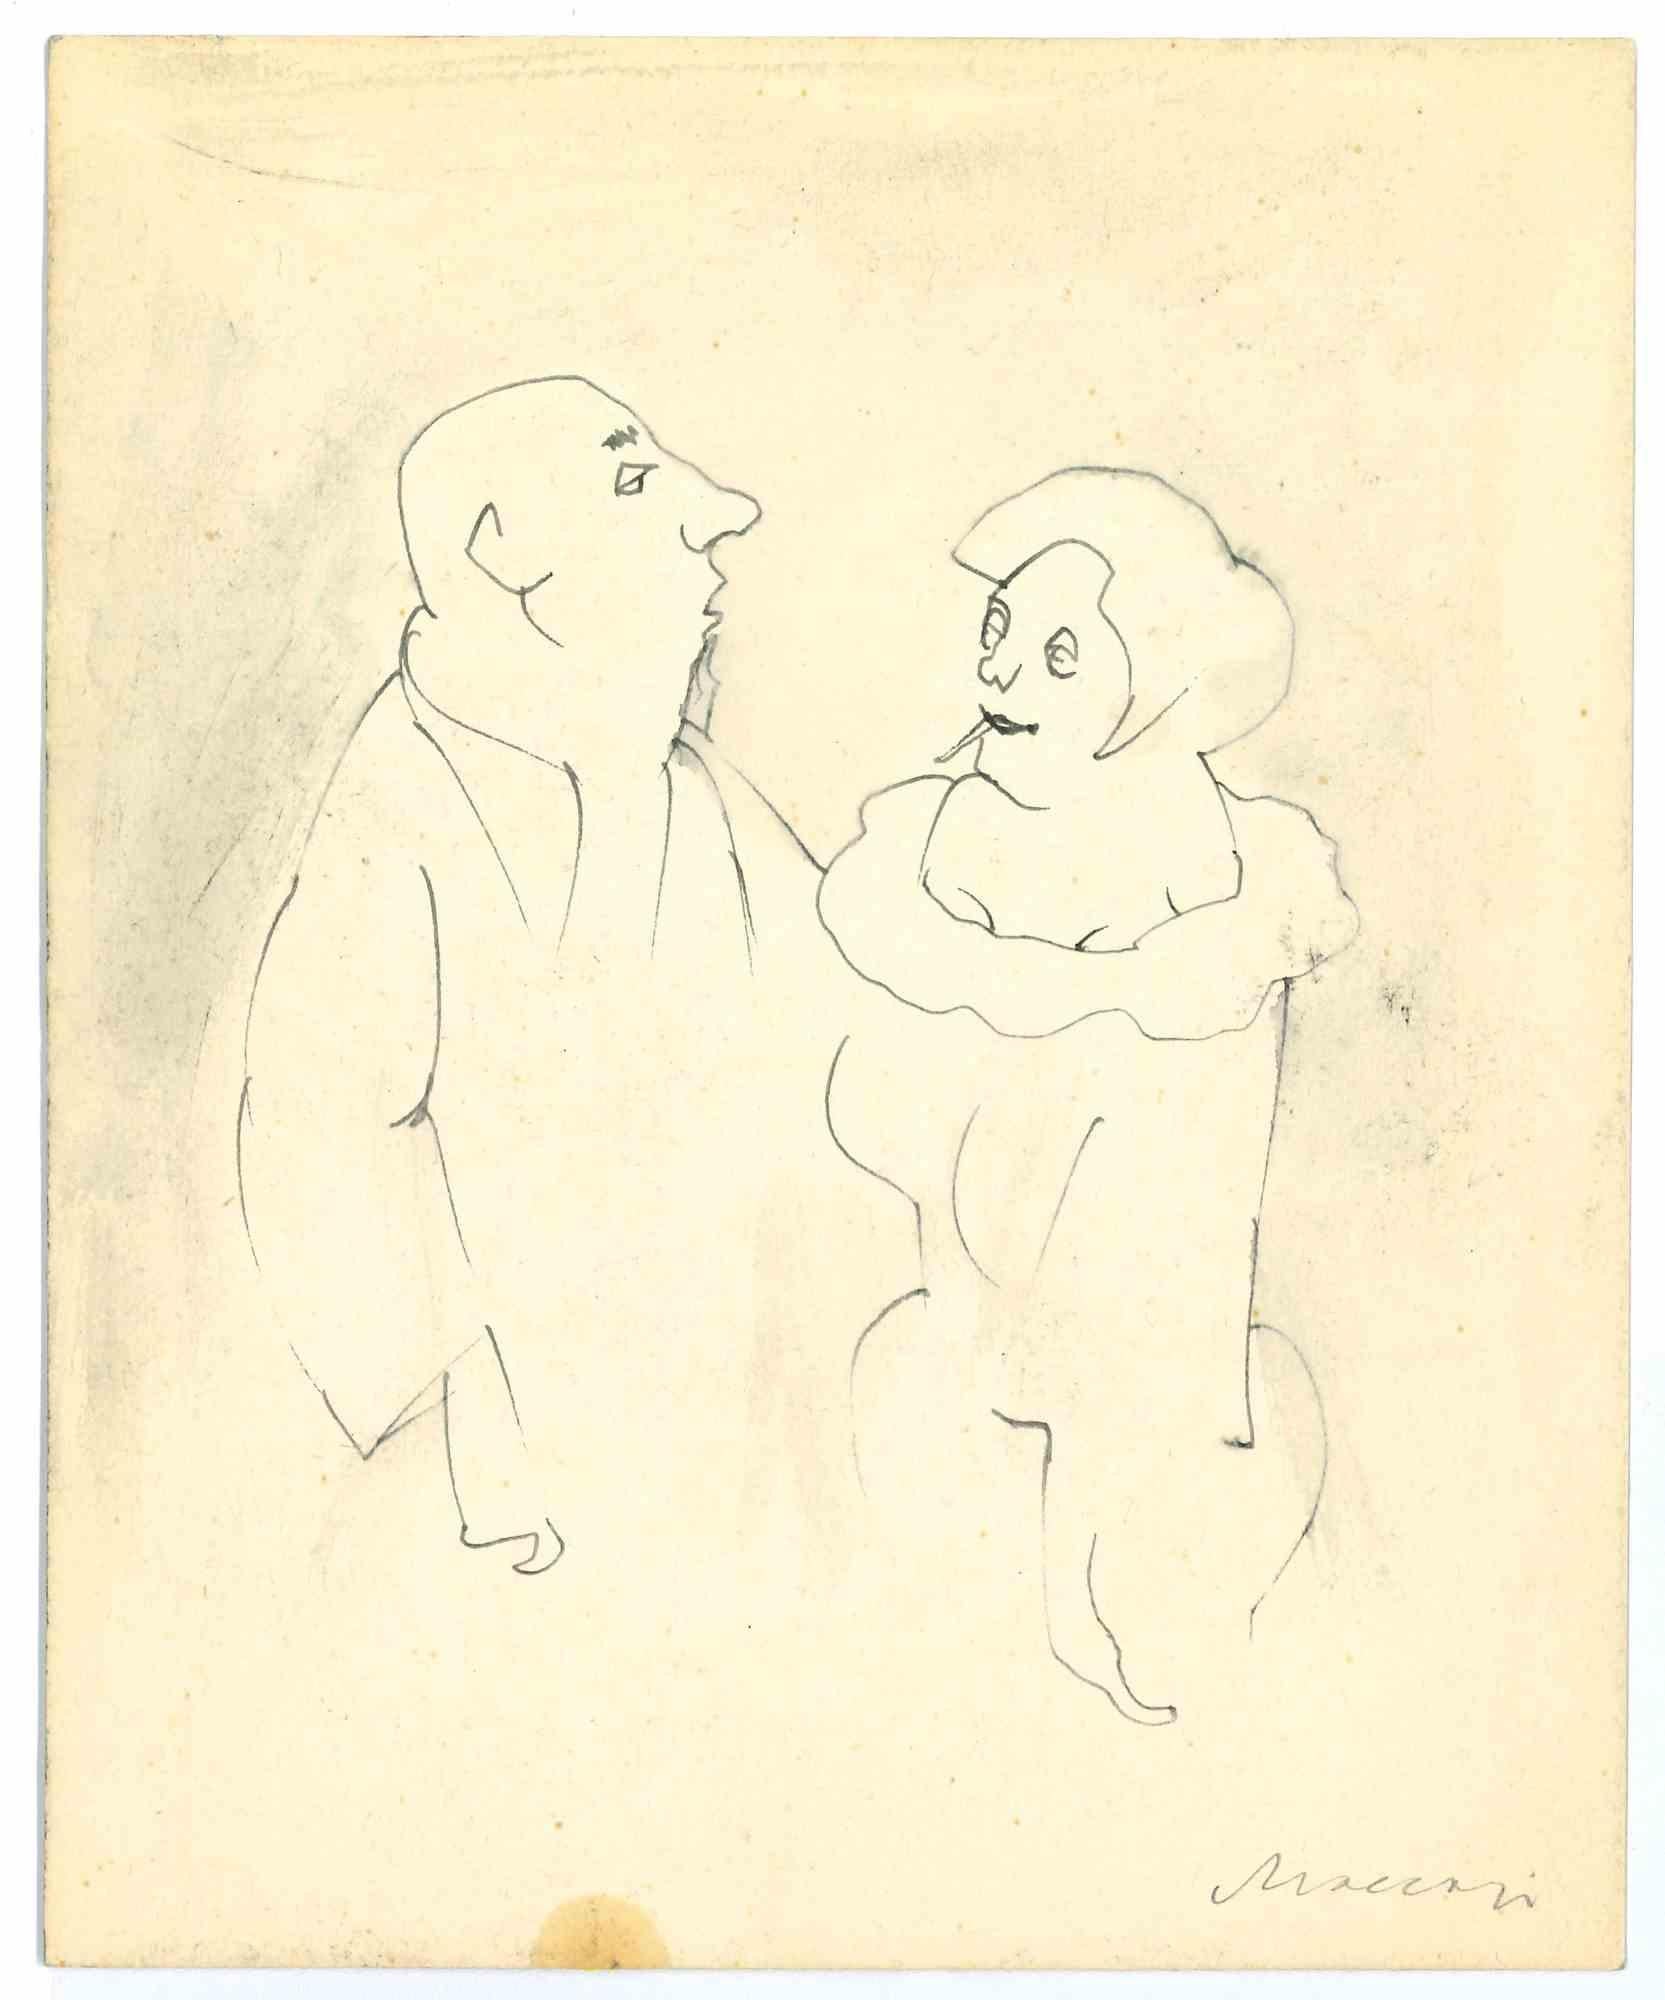 The Couple is a Pen and watercolor drawing realized by Mino Maccari  (1924-1989) in the 1960s.

Hand-signed on the lower.

Good conditions with some foxing

Mino Maccari (Siena, 1924-Rome, June 16, 1989) was an Italian writer, painter, engraver and